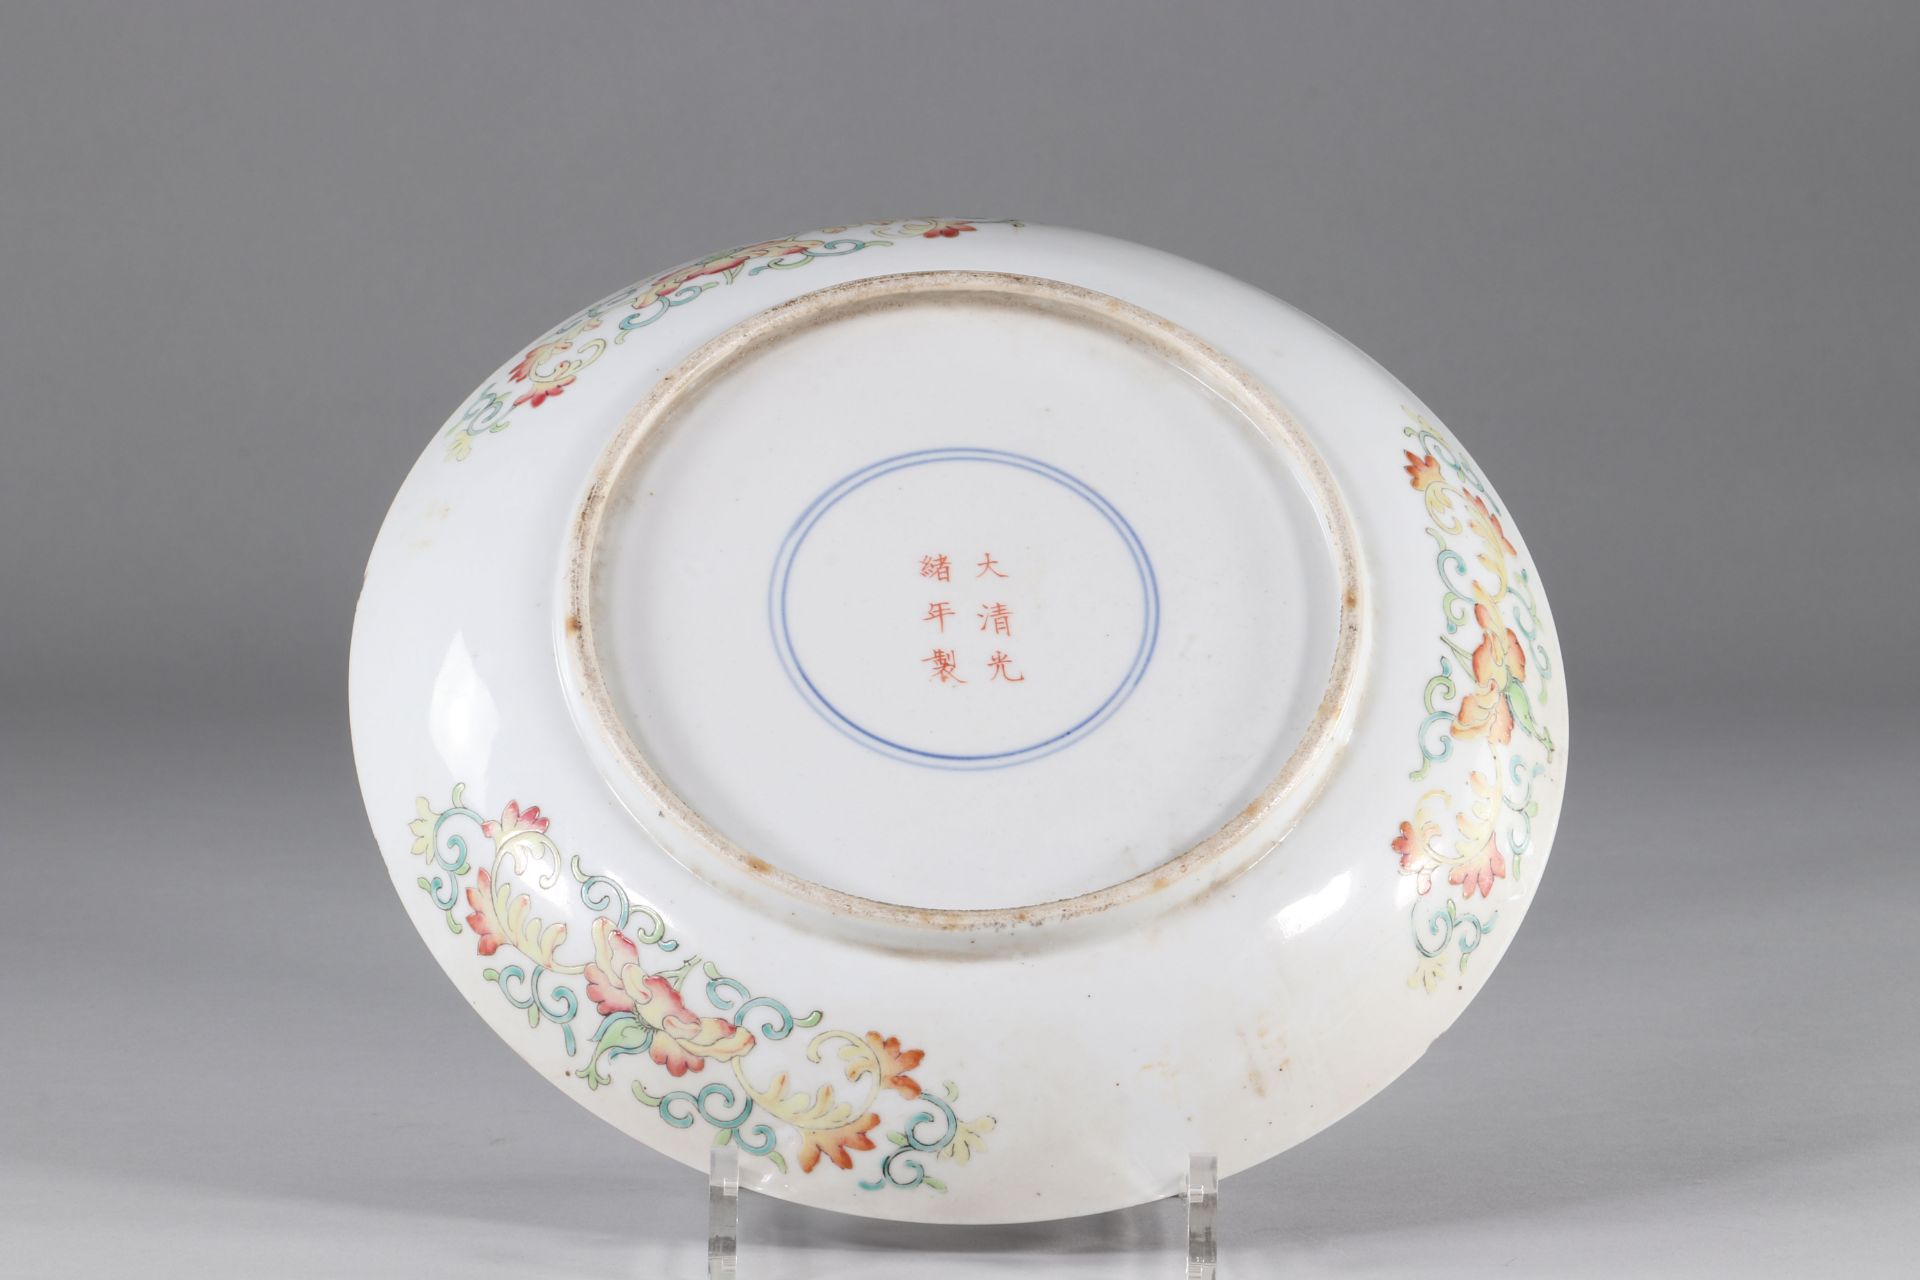 Porcelain dish with dragons, China Guangxu mark and period - Image 2 of 2